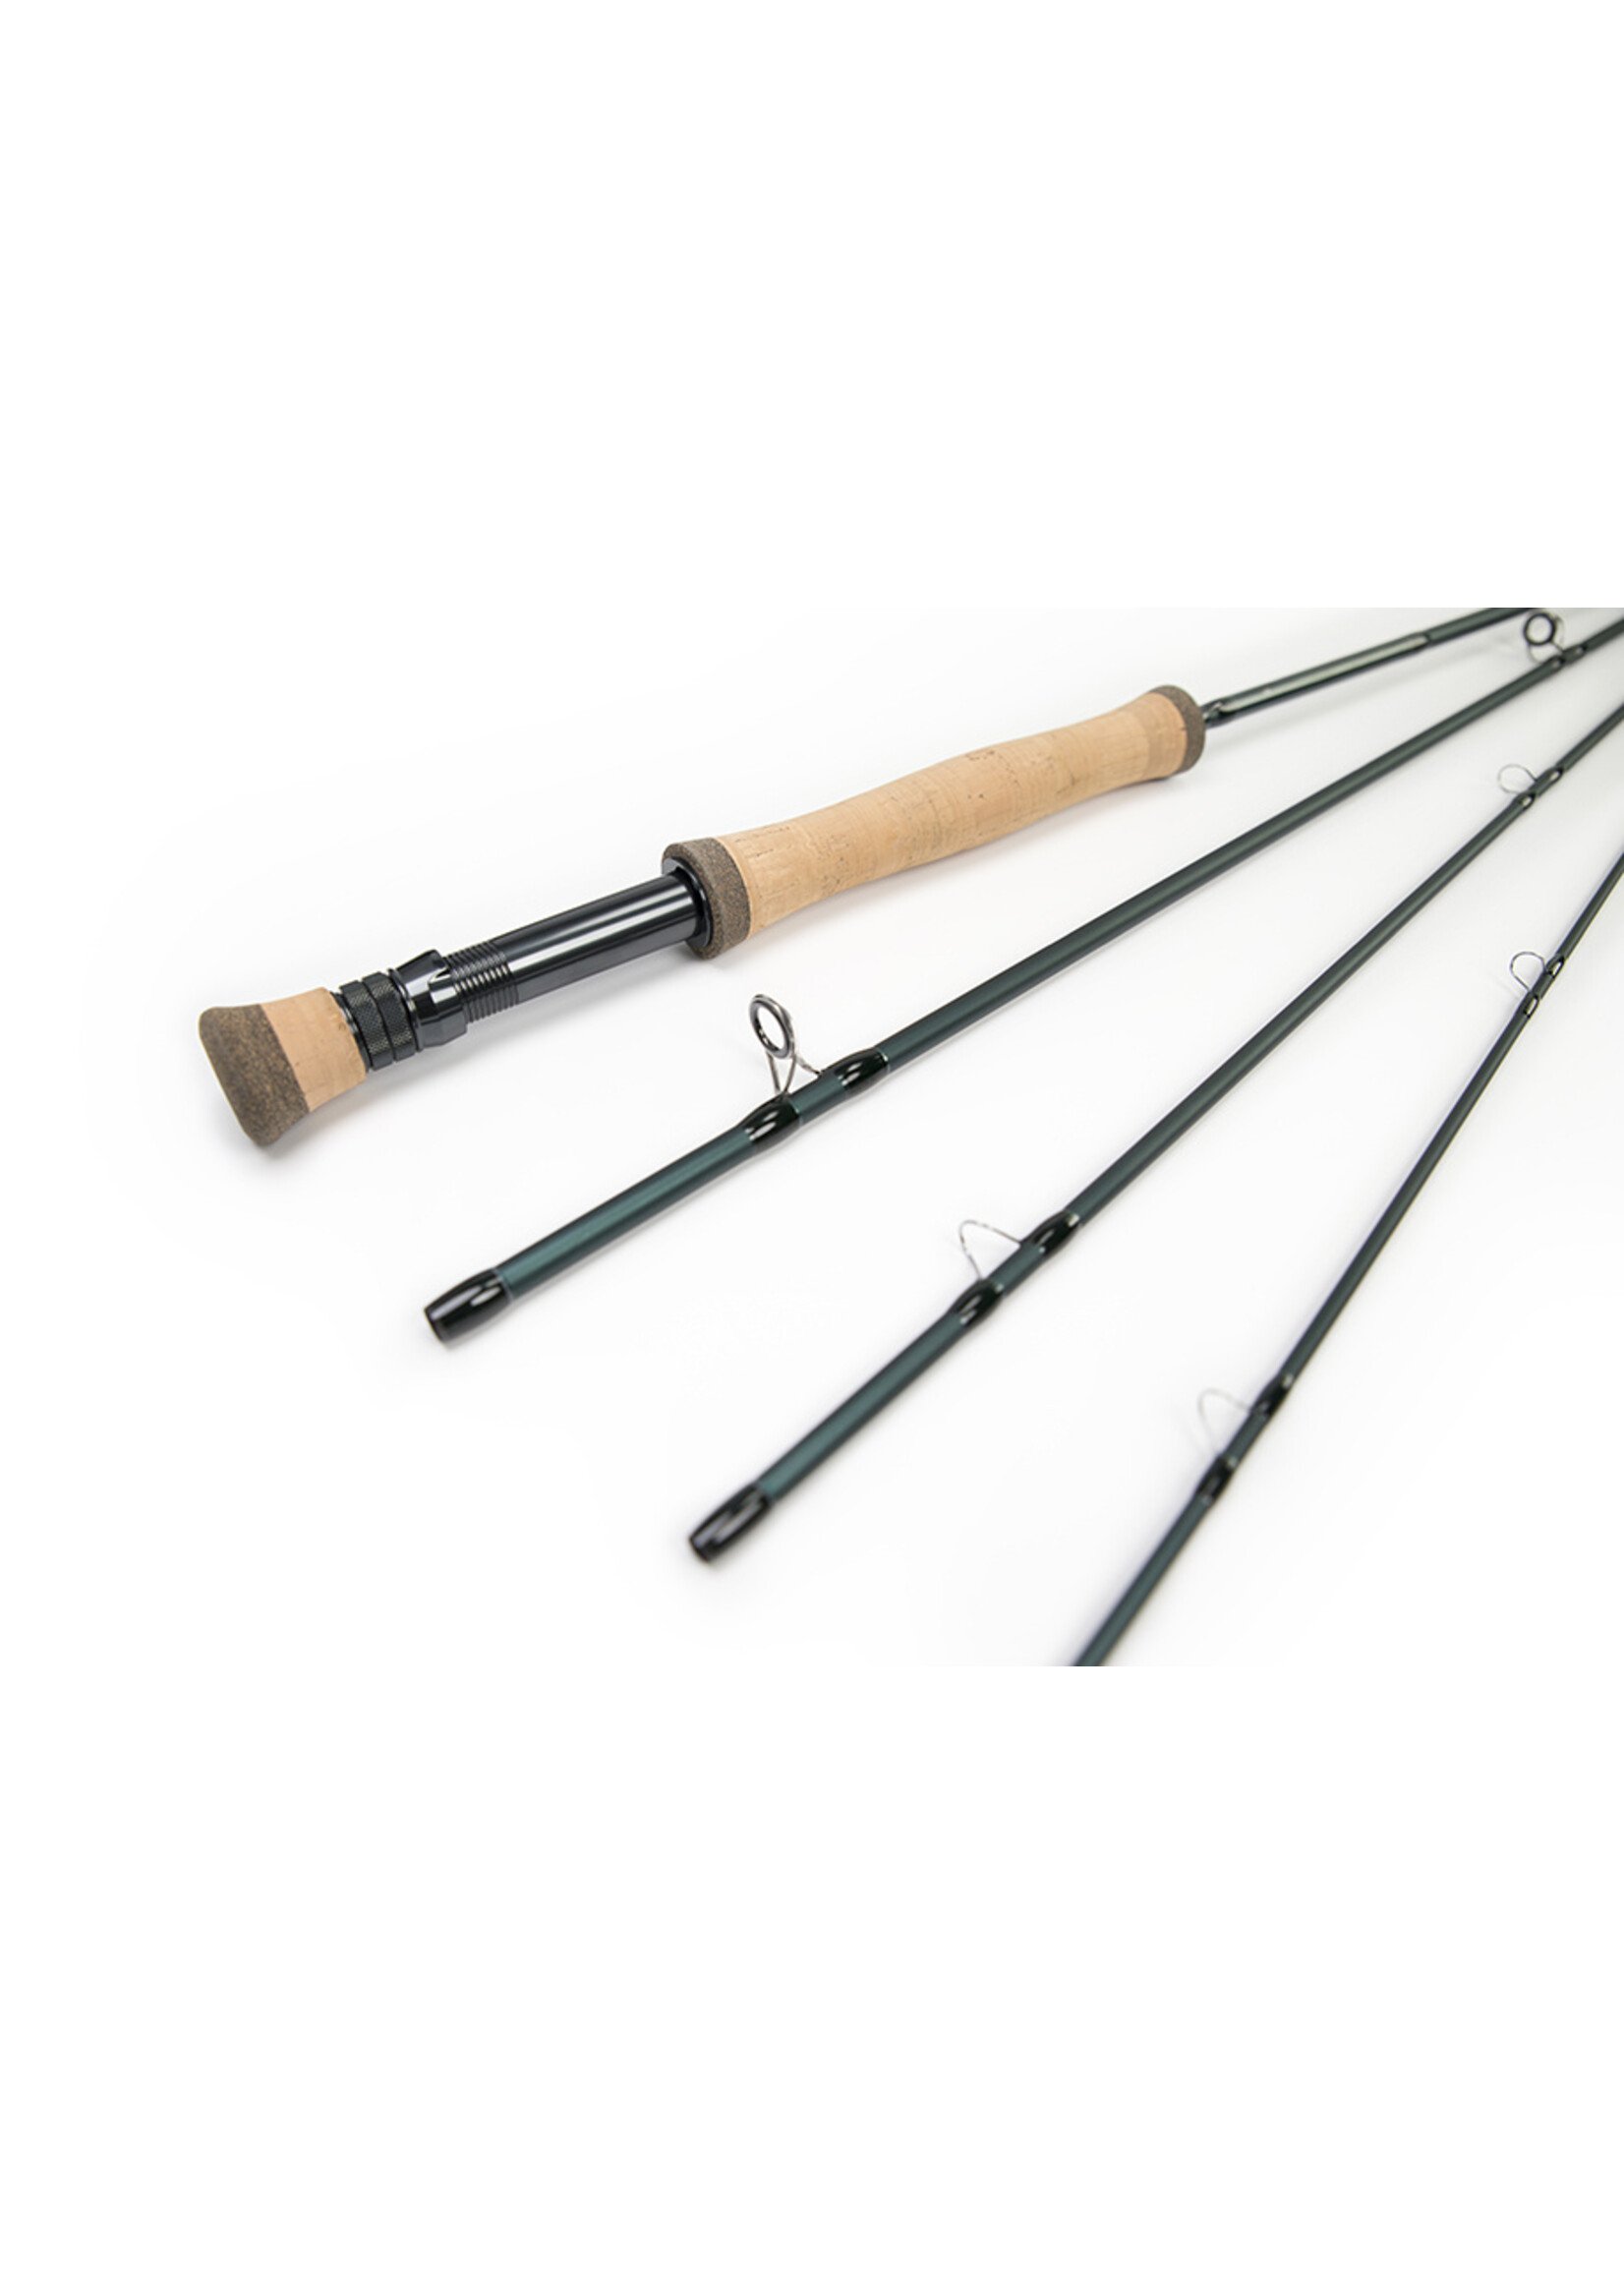 Douglas DXF Series Fly Rod - Tackle Shack